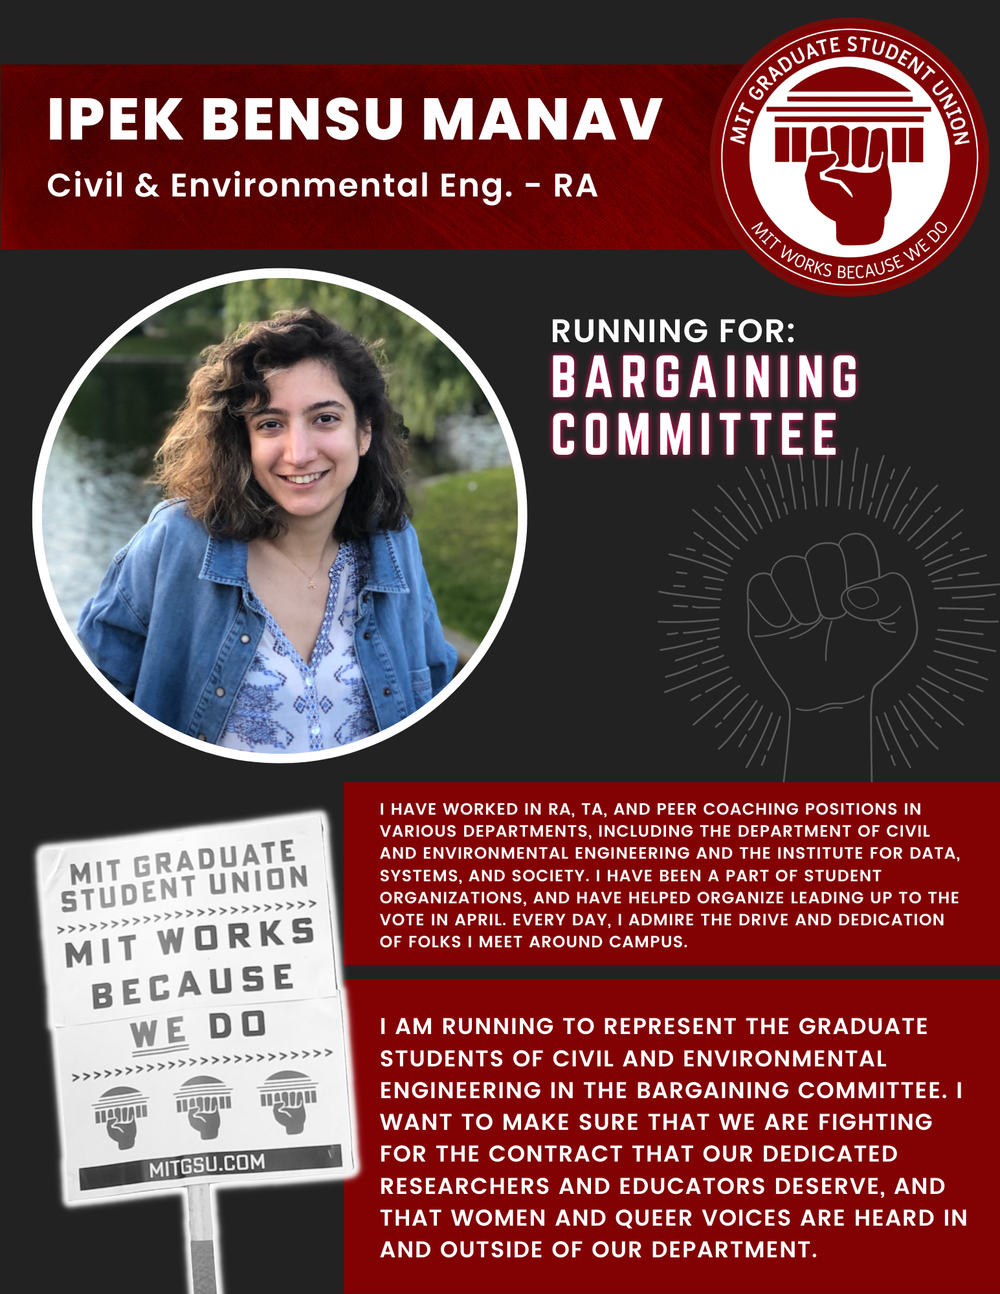  IPEK BENSU MANAV   Civil &amp; Environmental Eng. - RA   RUNNING FOR: Bargaining Committee  I HAVE WORKED IN RA, TA, AND PEER COACHING POSITIONS IN VARIOUS DEPARTMENTS, INCLUDING THE DEPARTMENT OF CIVIL AND ENVIRONMENTAL ENGINEERING AND THE INSTITUT